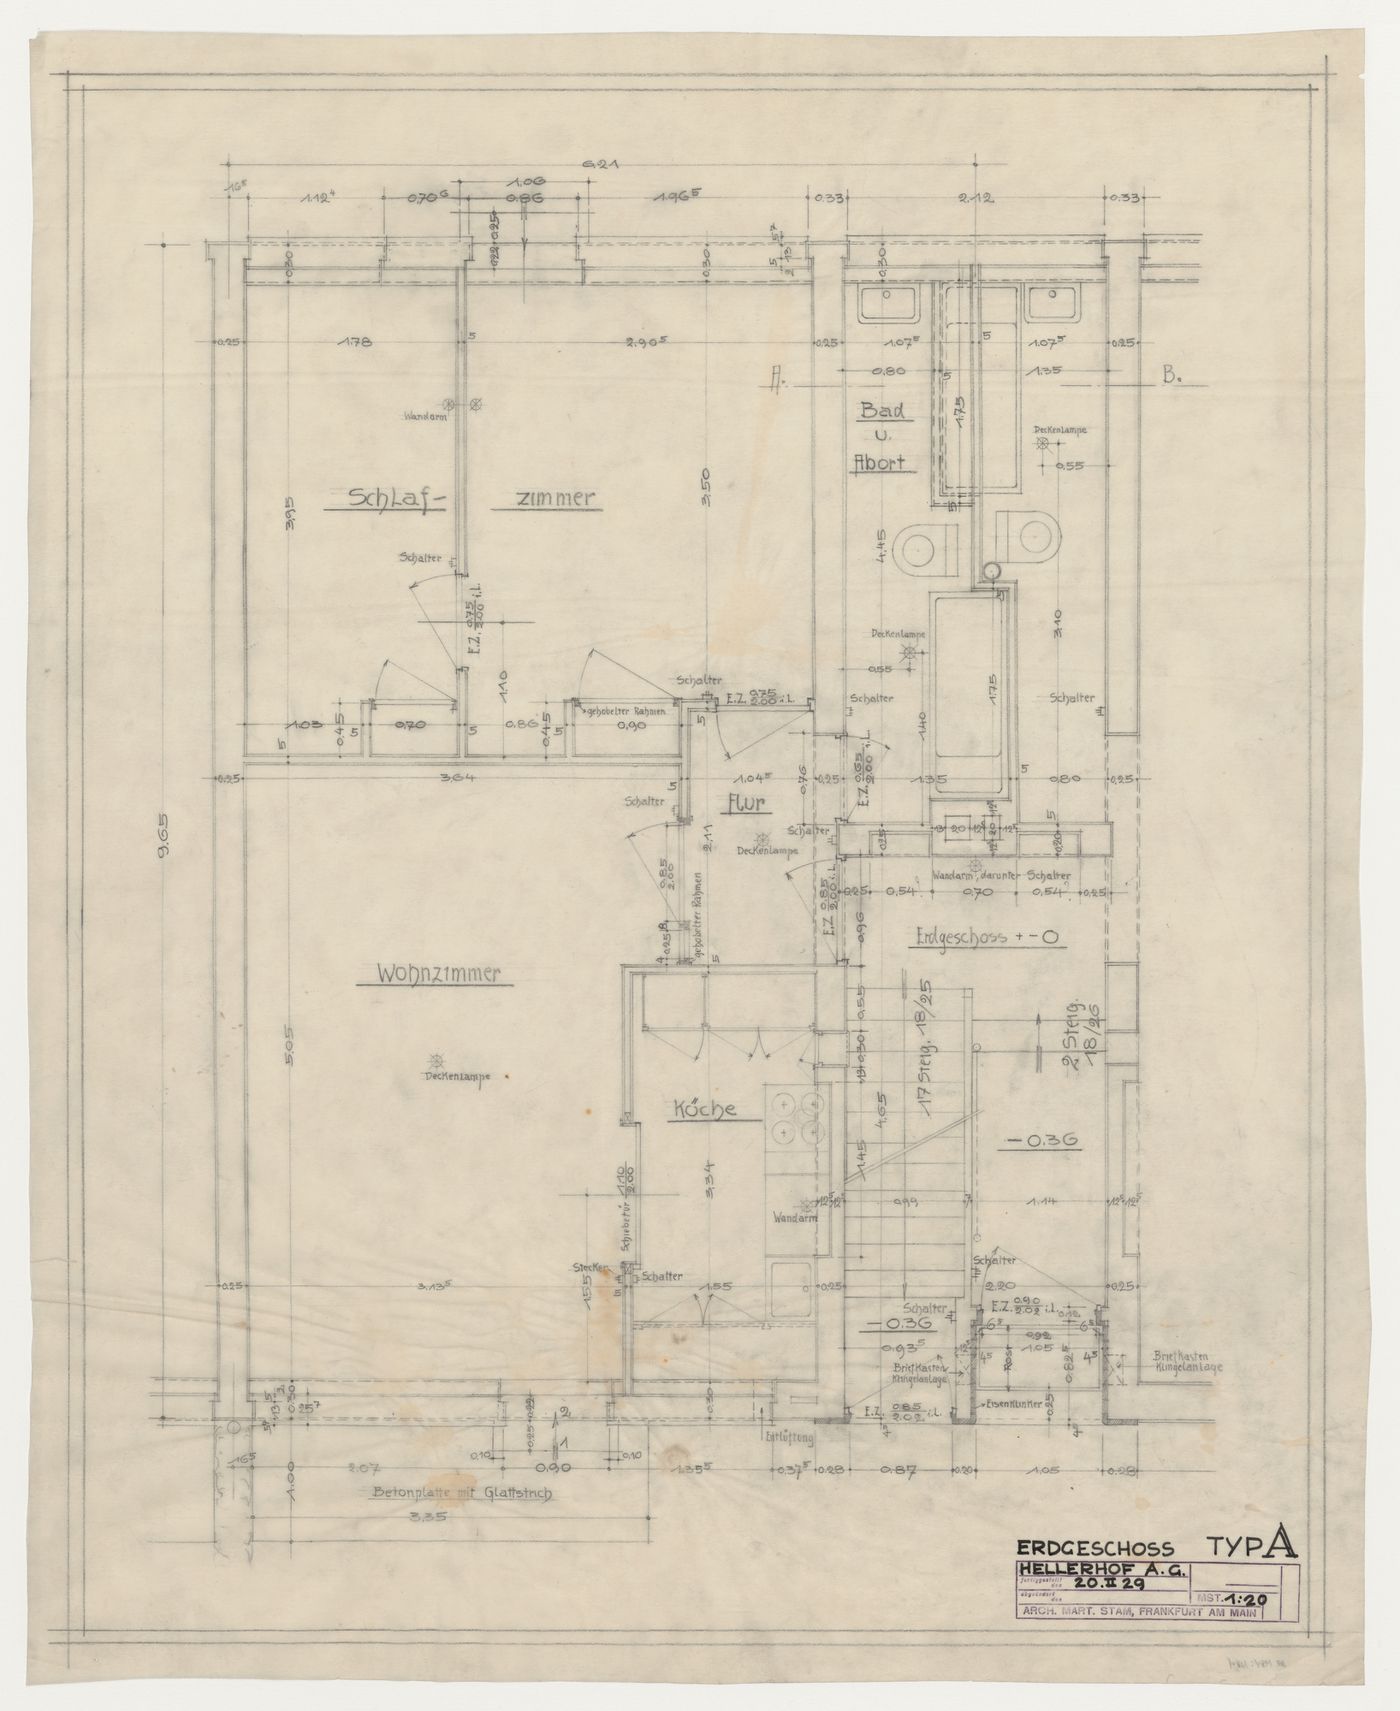 Ground floor plan for a type A housing unit, Frankfurt am Main, Germany